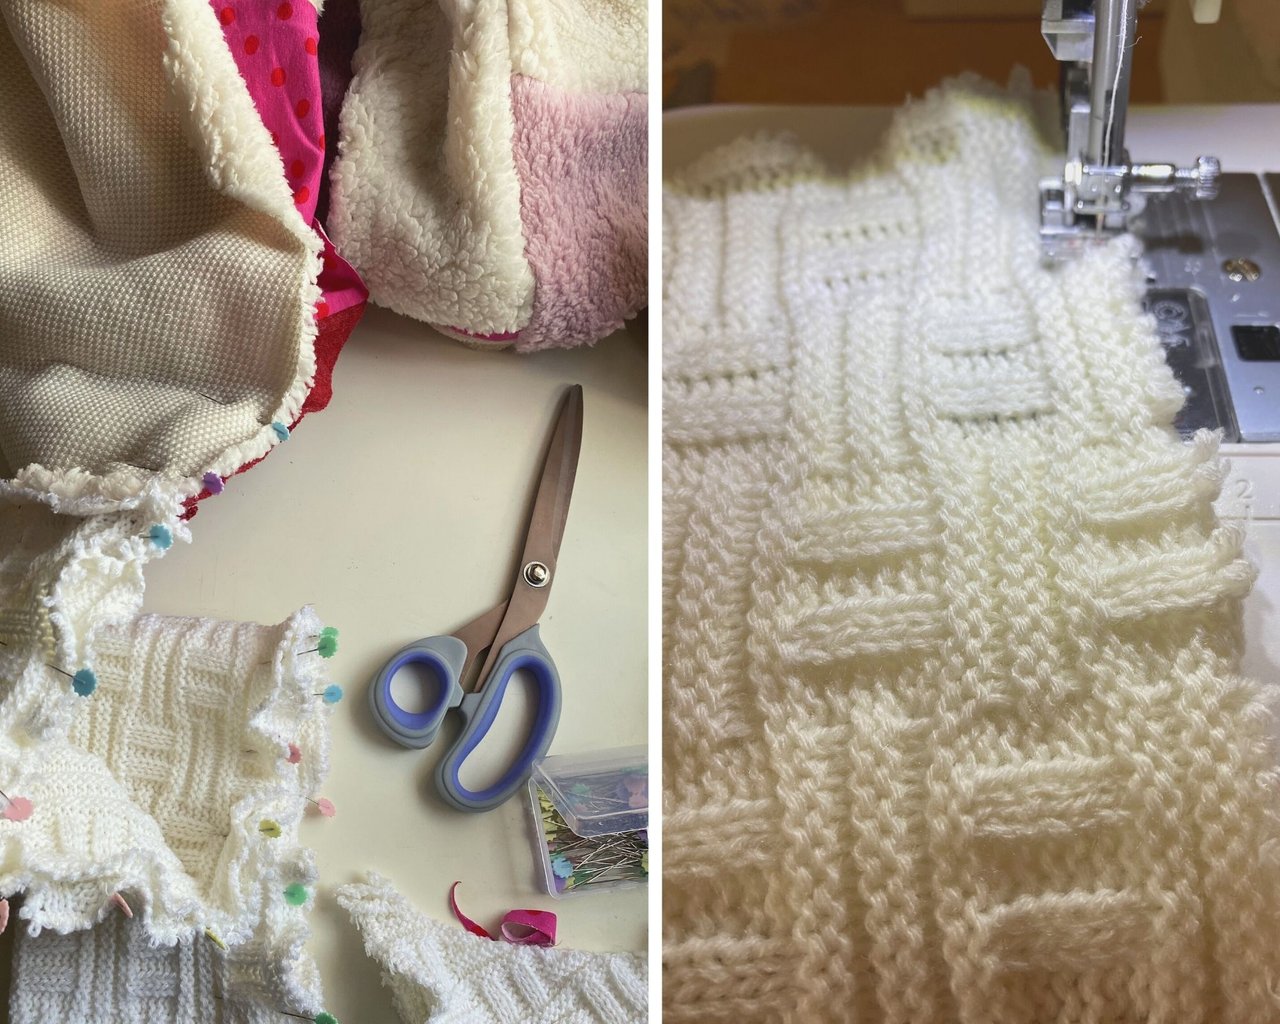 securing the fraing stitches of a knitted fabric with the sewing machine